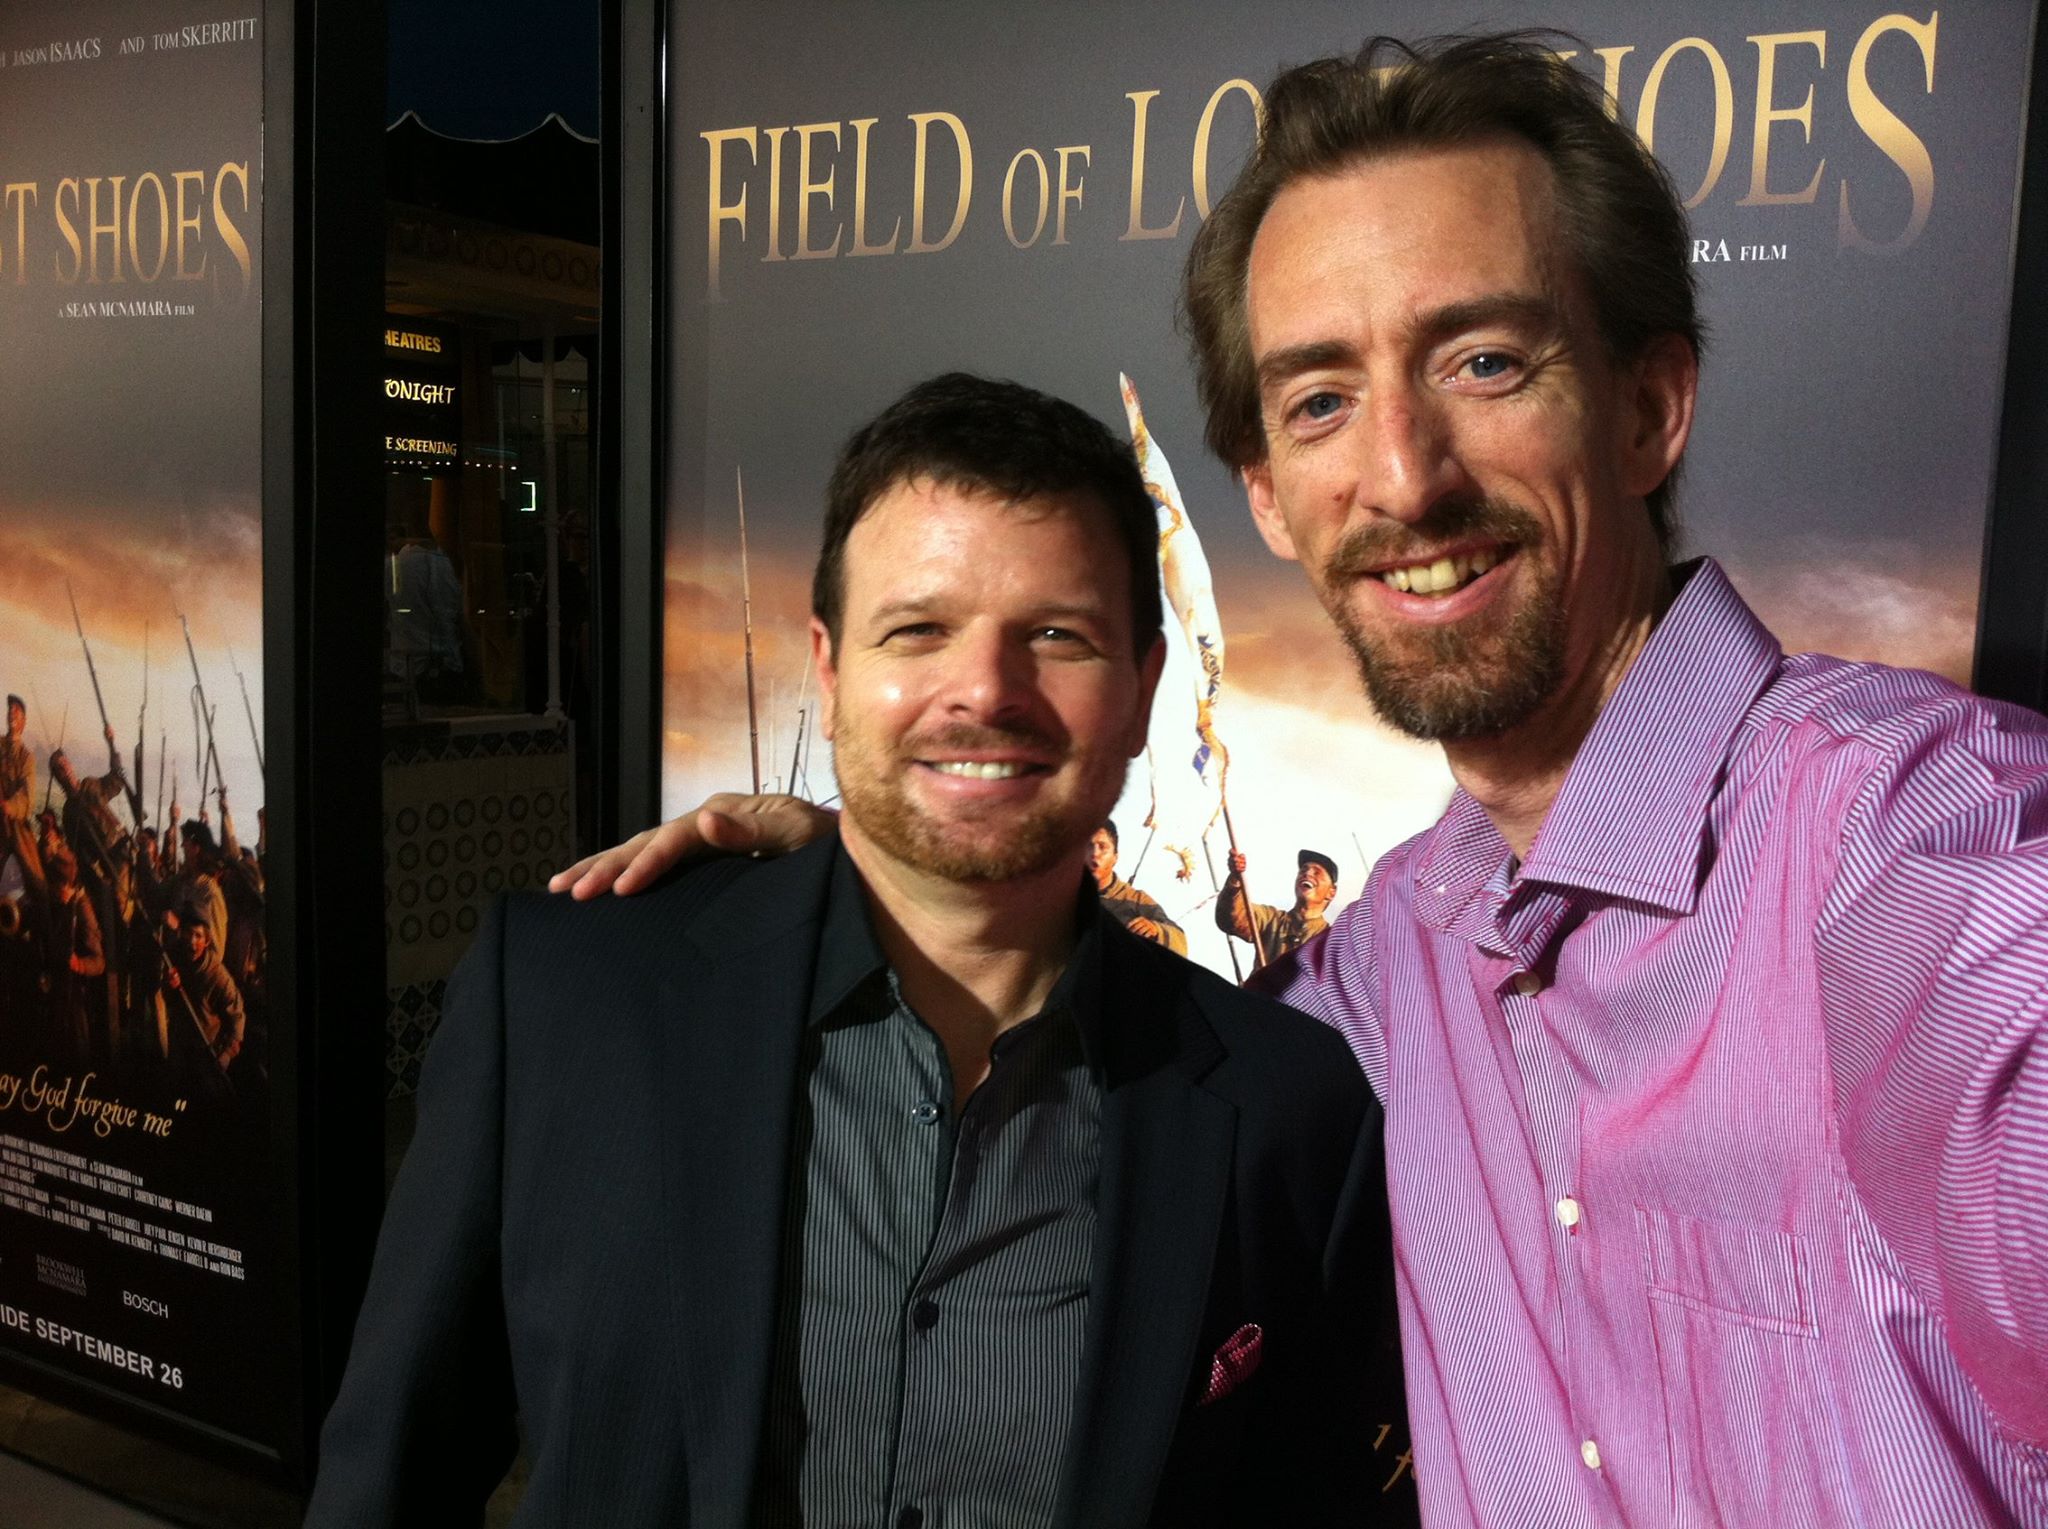 Tim Lowry with producing partner Mike Wech at the premiere of long time friend Sean McNamara's film Lost Field of Shoes.